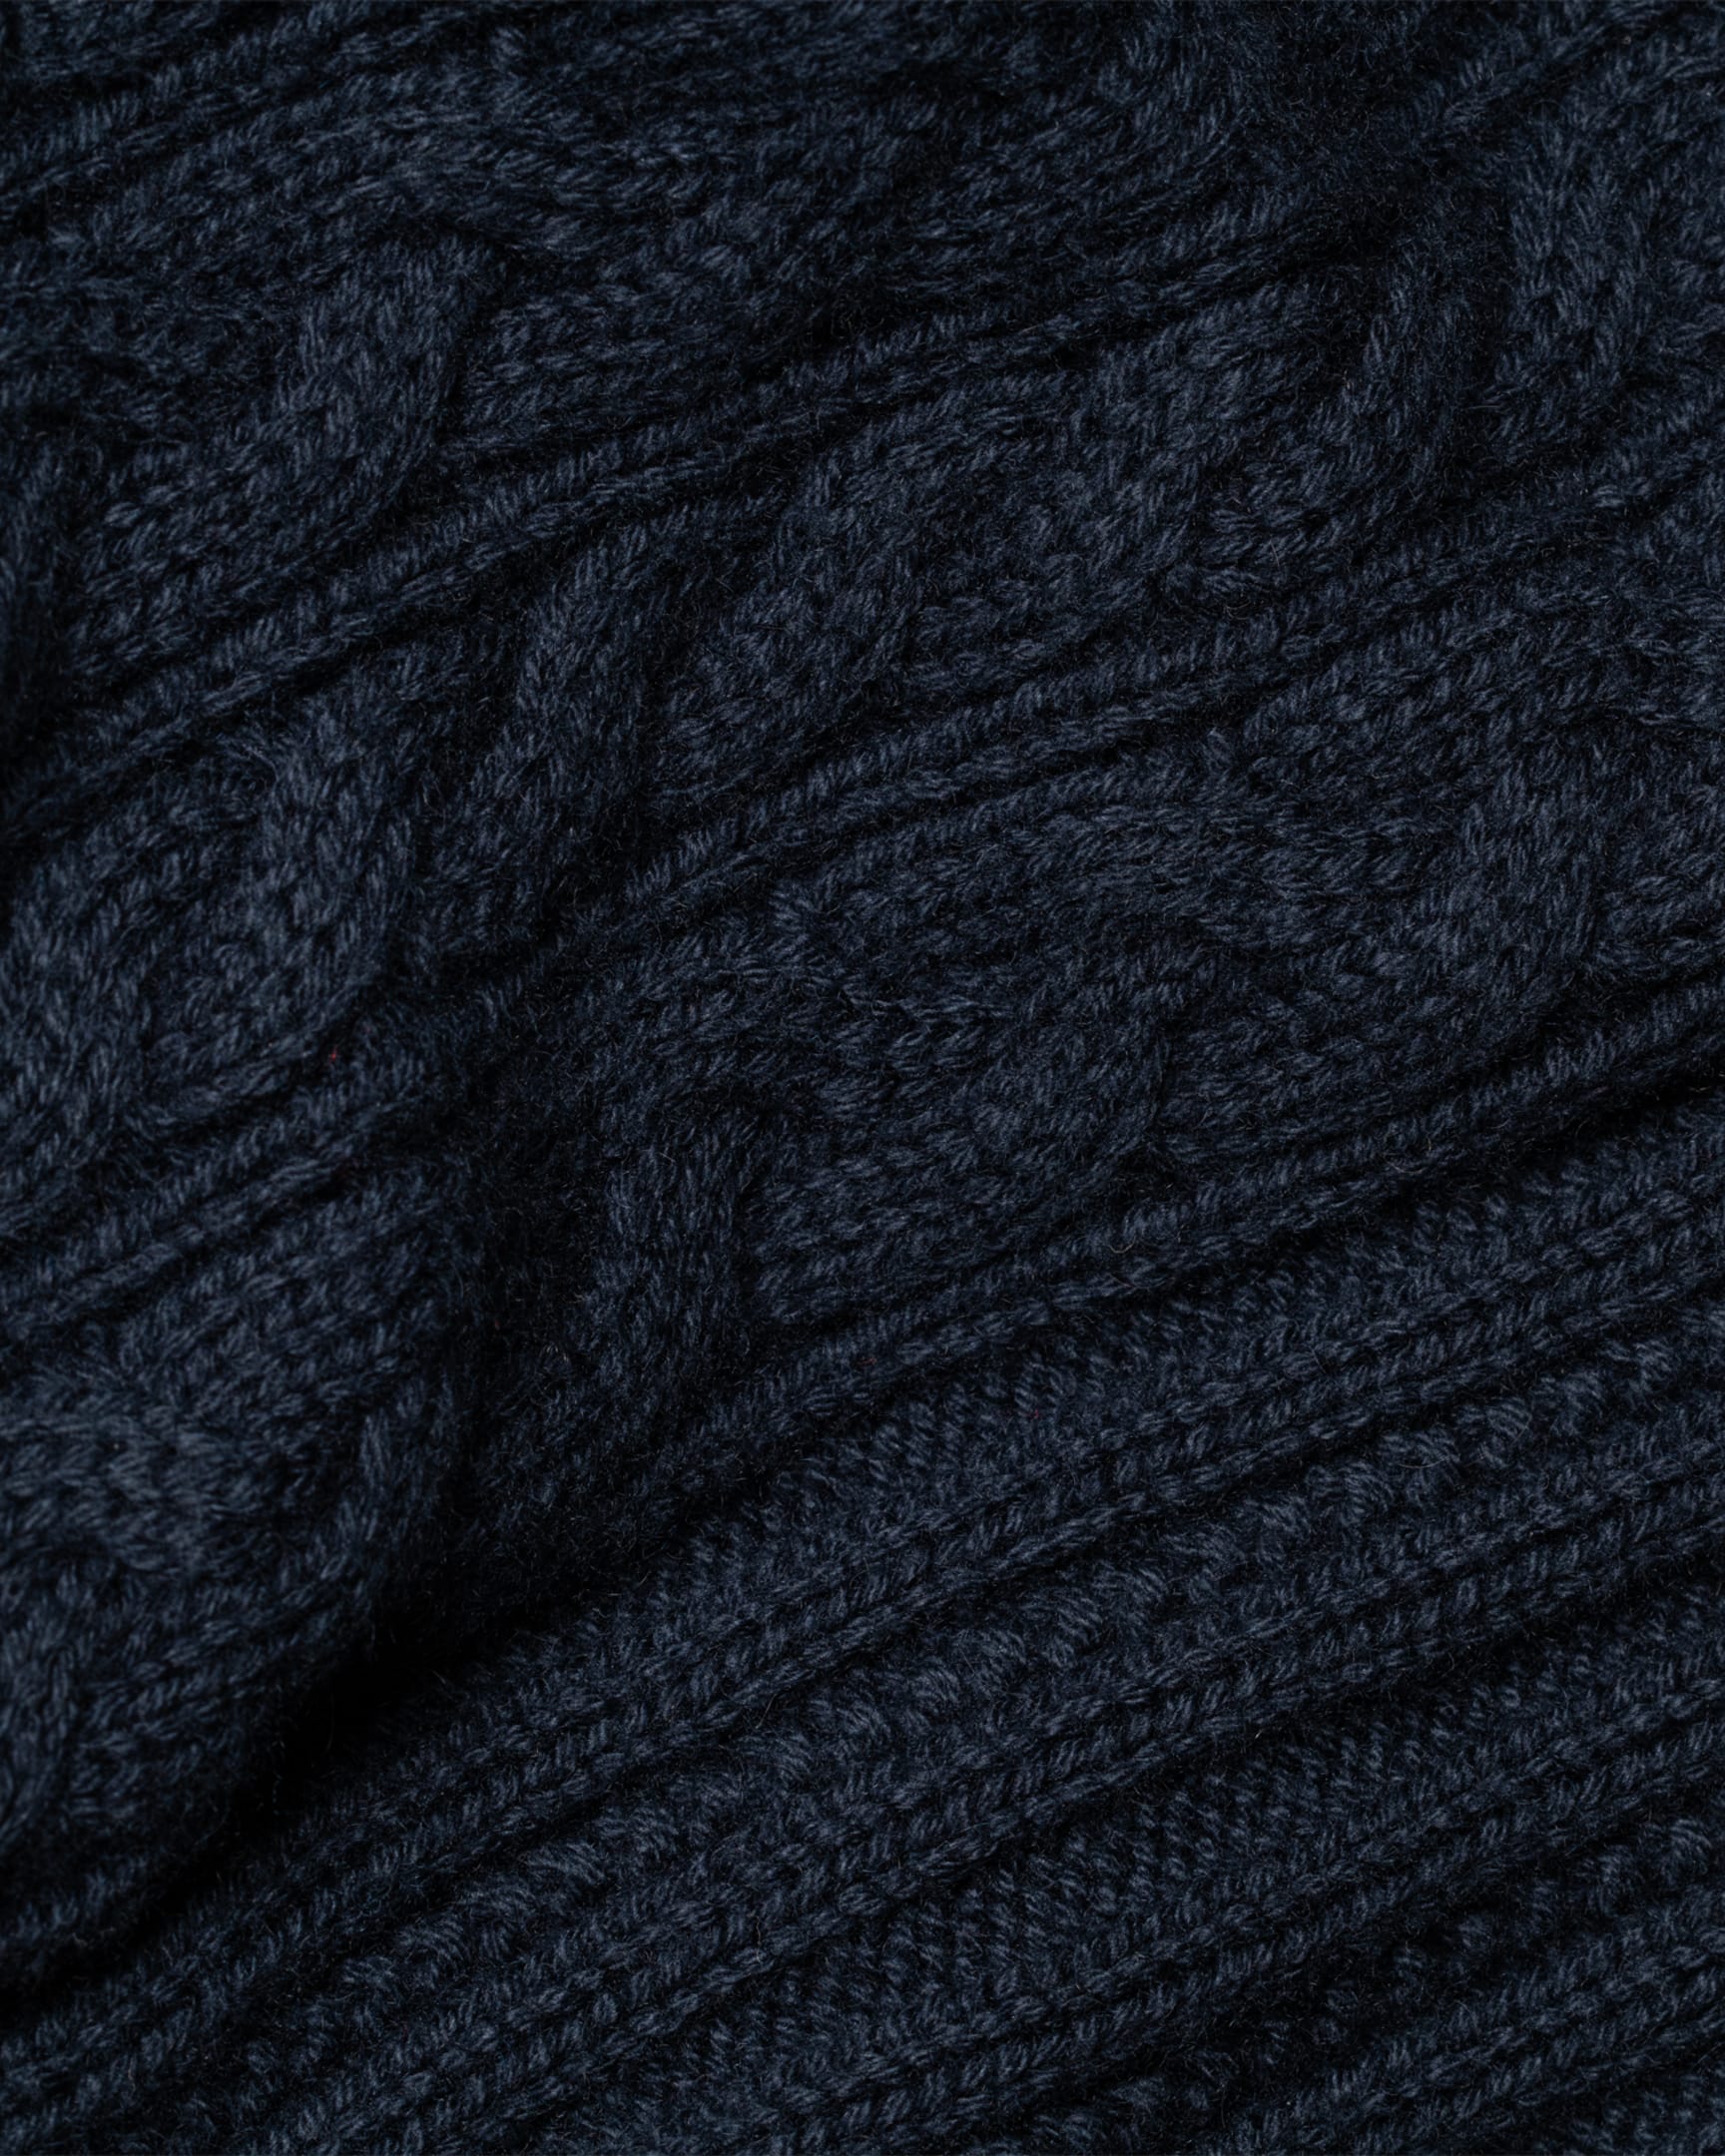 Detail View - Navy Cotton-Cashmere Cable Knit Sweater Paul Smith